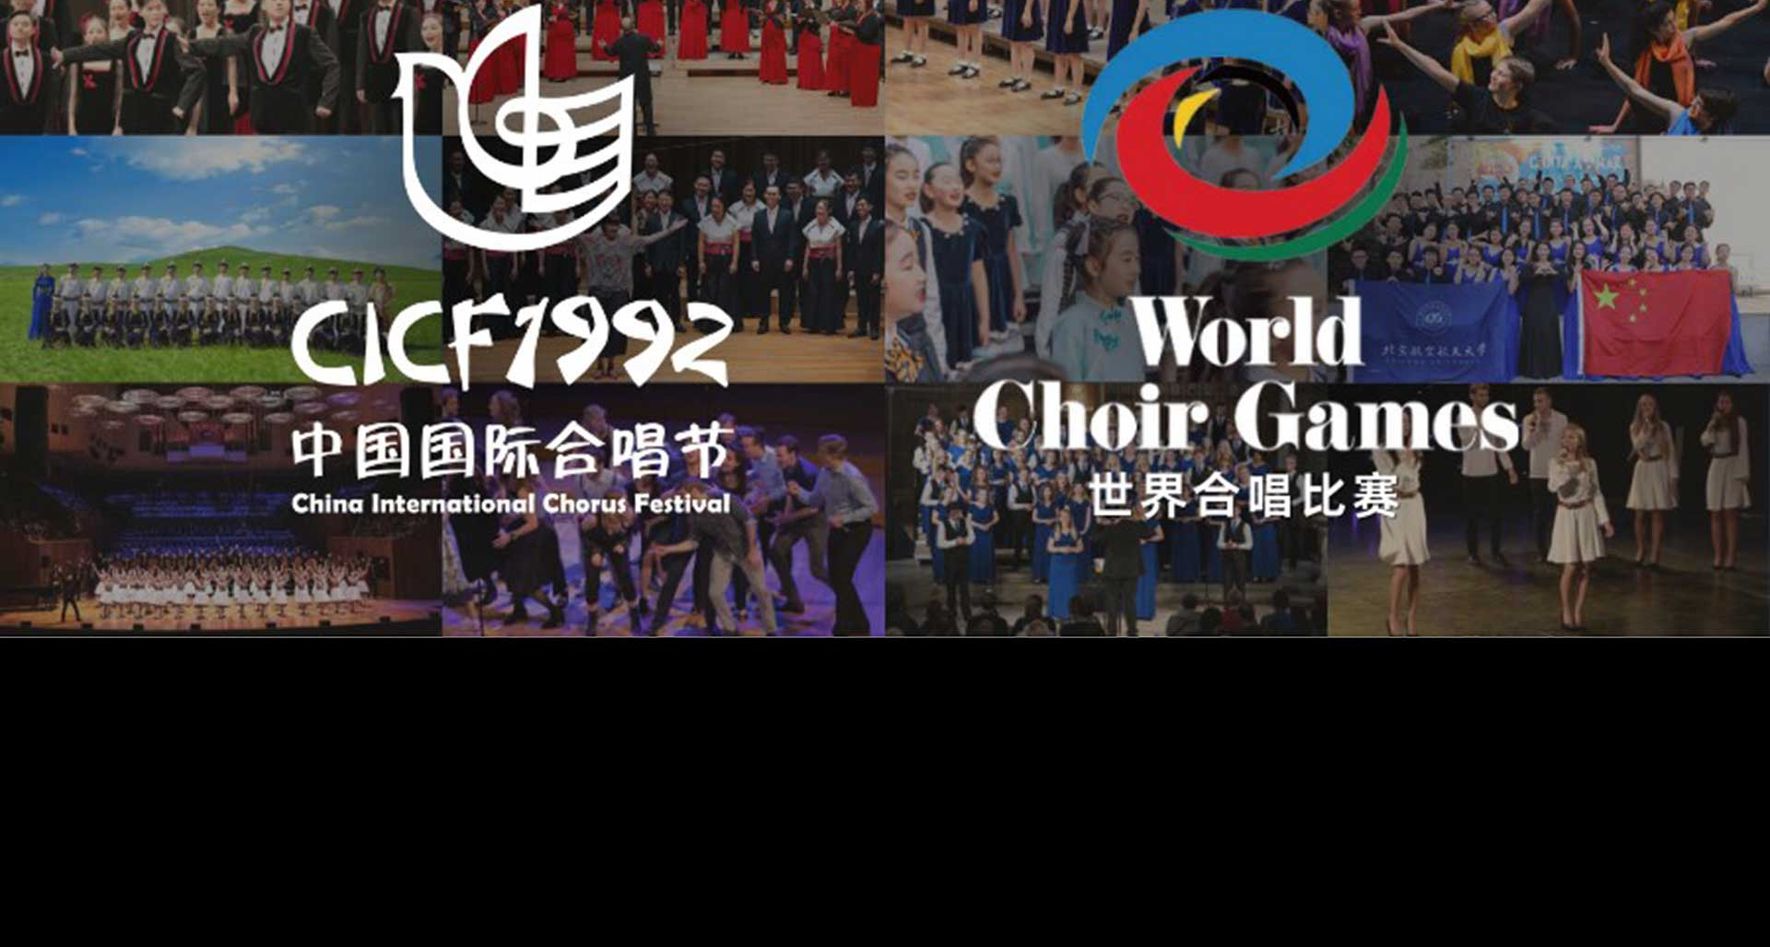 Champions Concert of the CICF and WCG